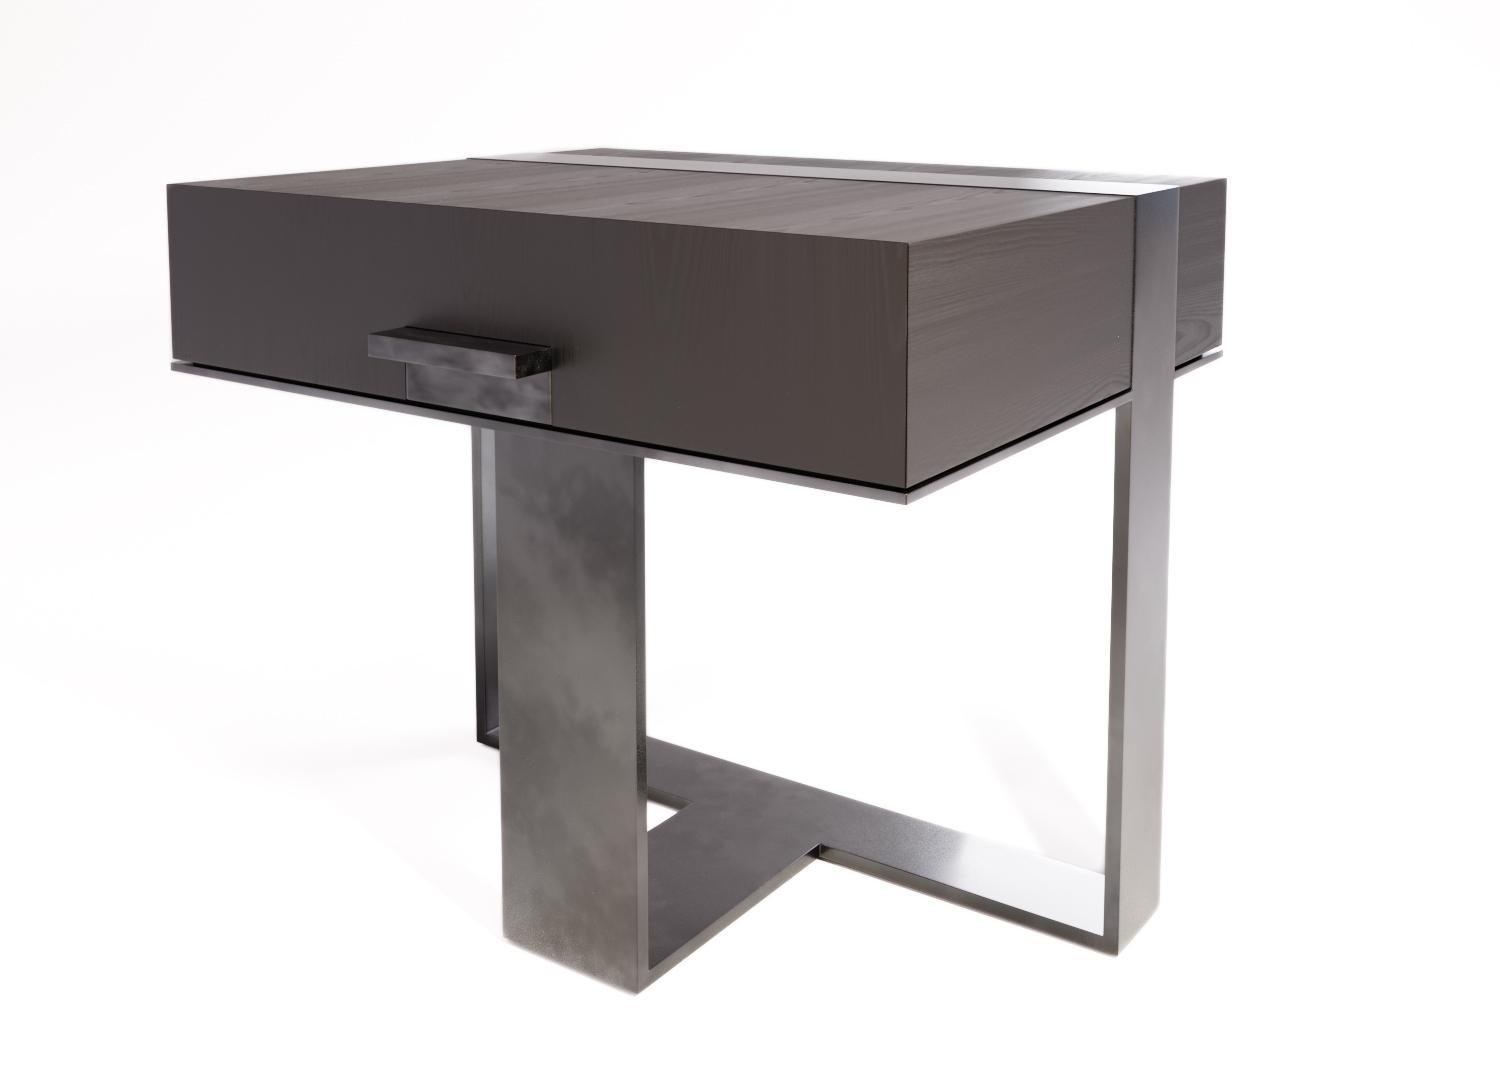 The LUMA Design Workshop strap nightstand is the result of thoughtful design and expert craftsmanship. A truffle oak top and drawer is supported by an antique steel strap leg and base. The hardware is also antique steel.

Like all LUMA Furniture,